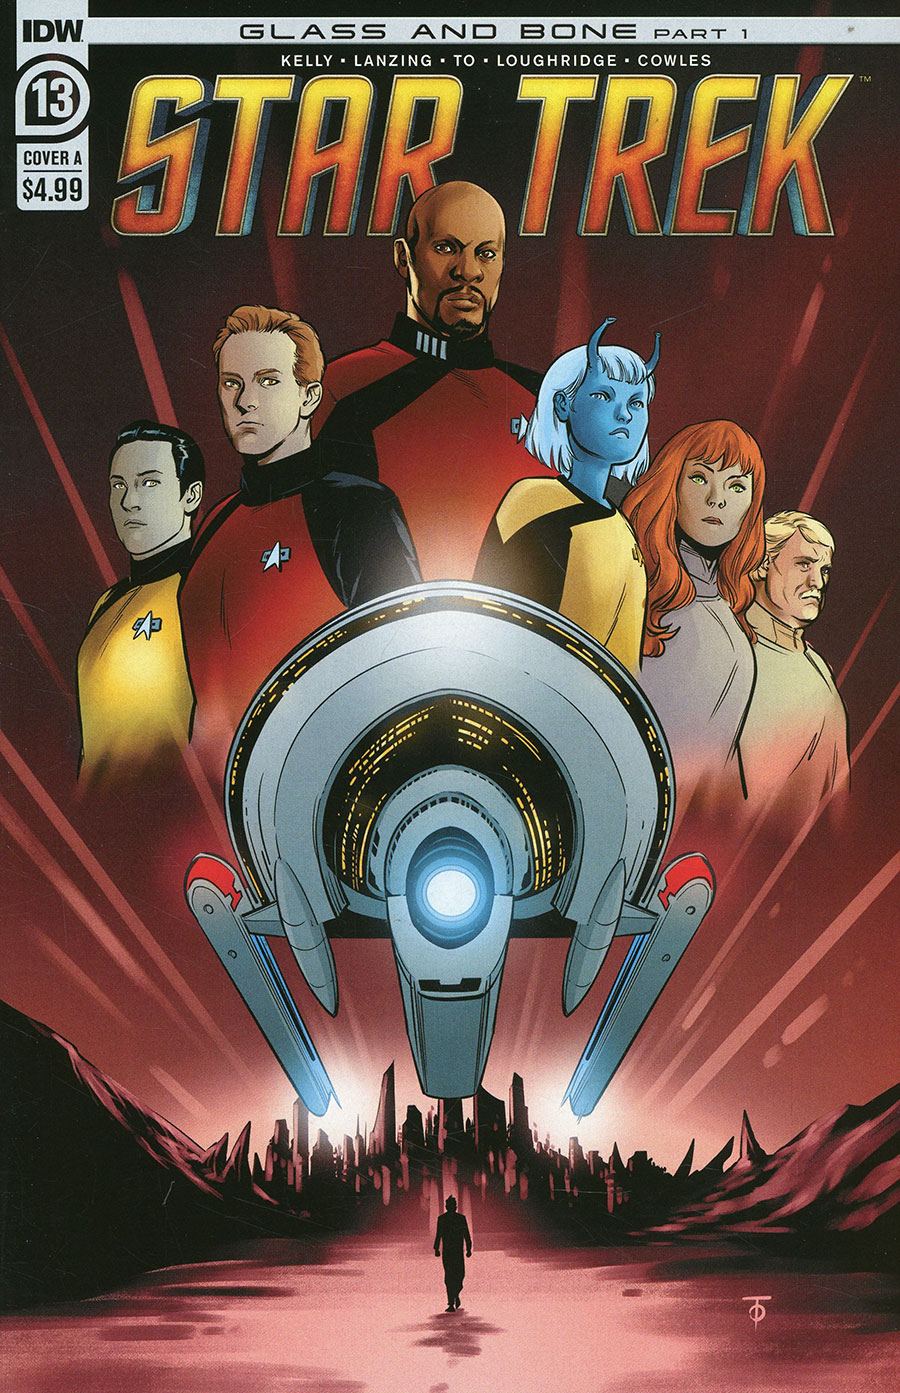 Star Trek (IDW) Vol 2 #13 Cover A Regular Marcus To Cover